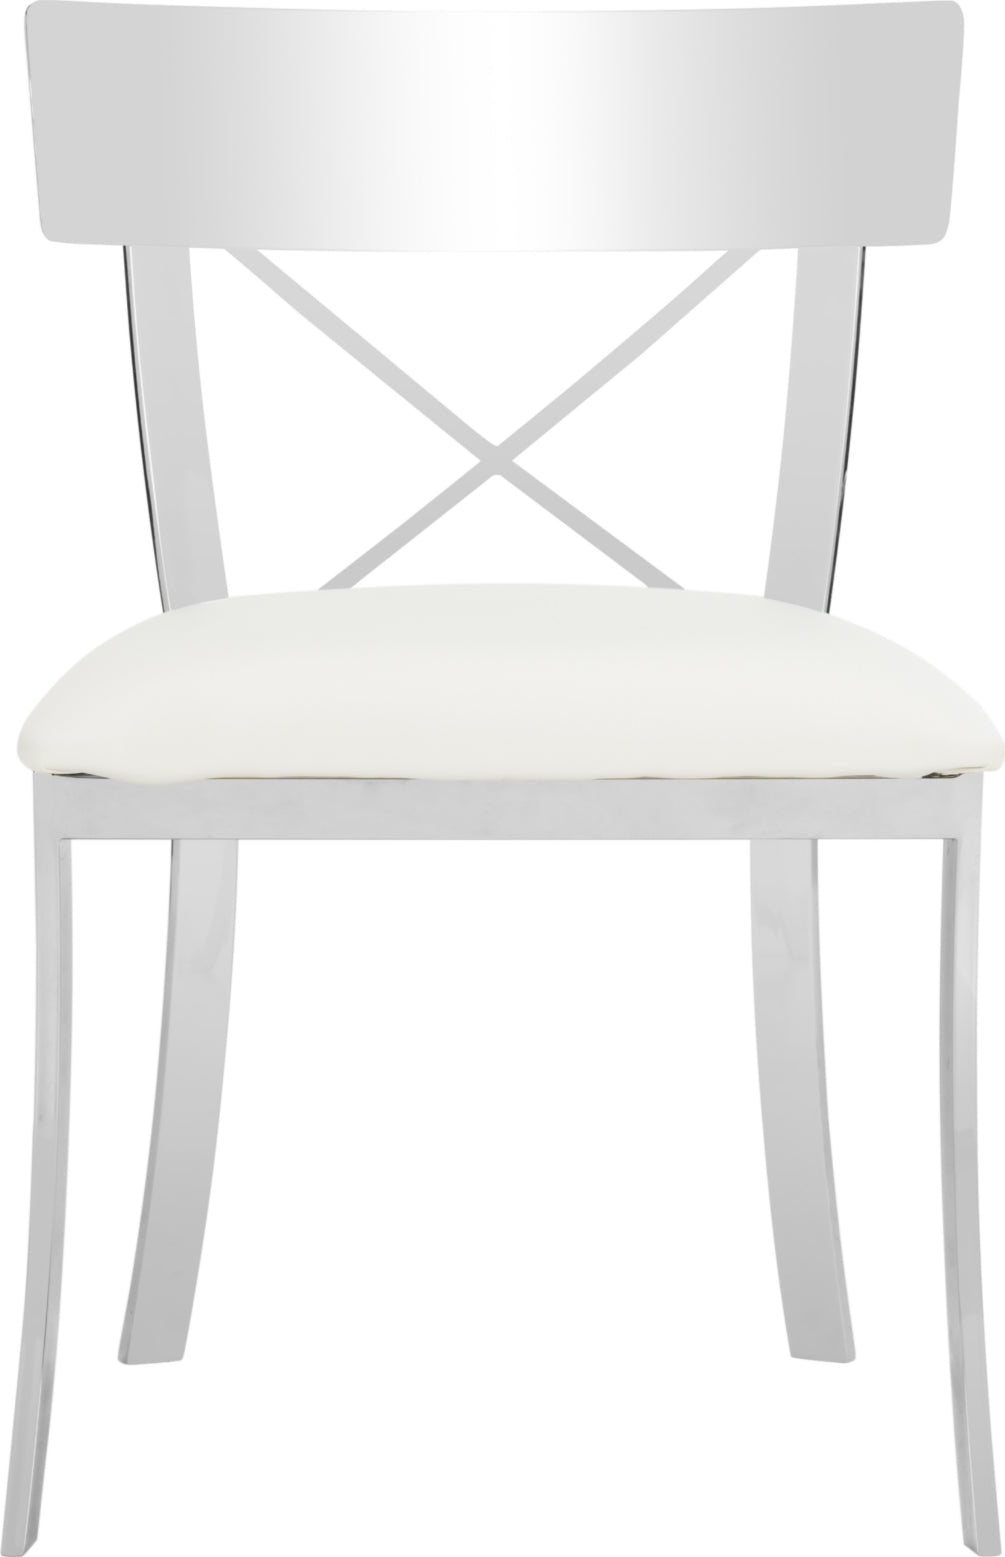 Safavieh Zoey Side Chair White and Chrome main image